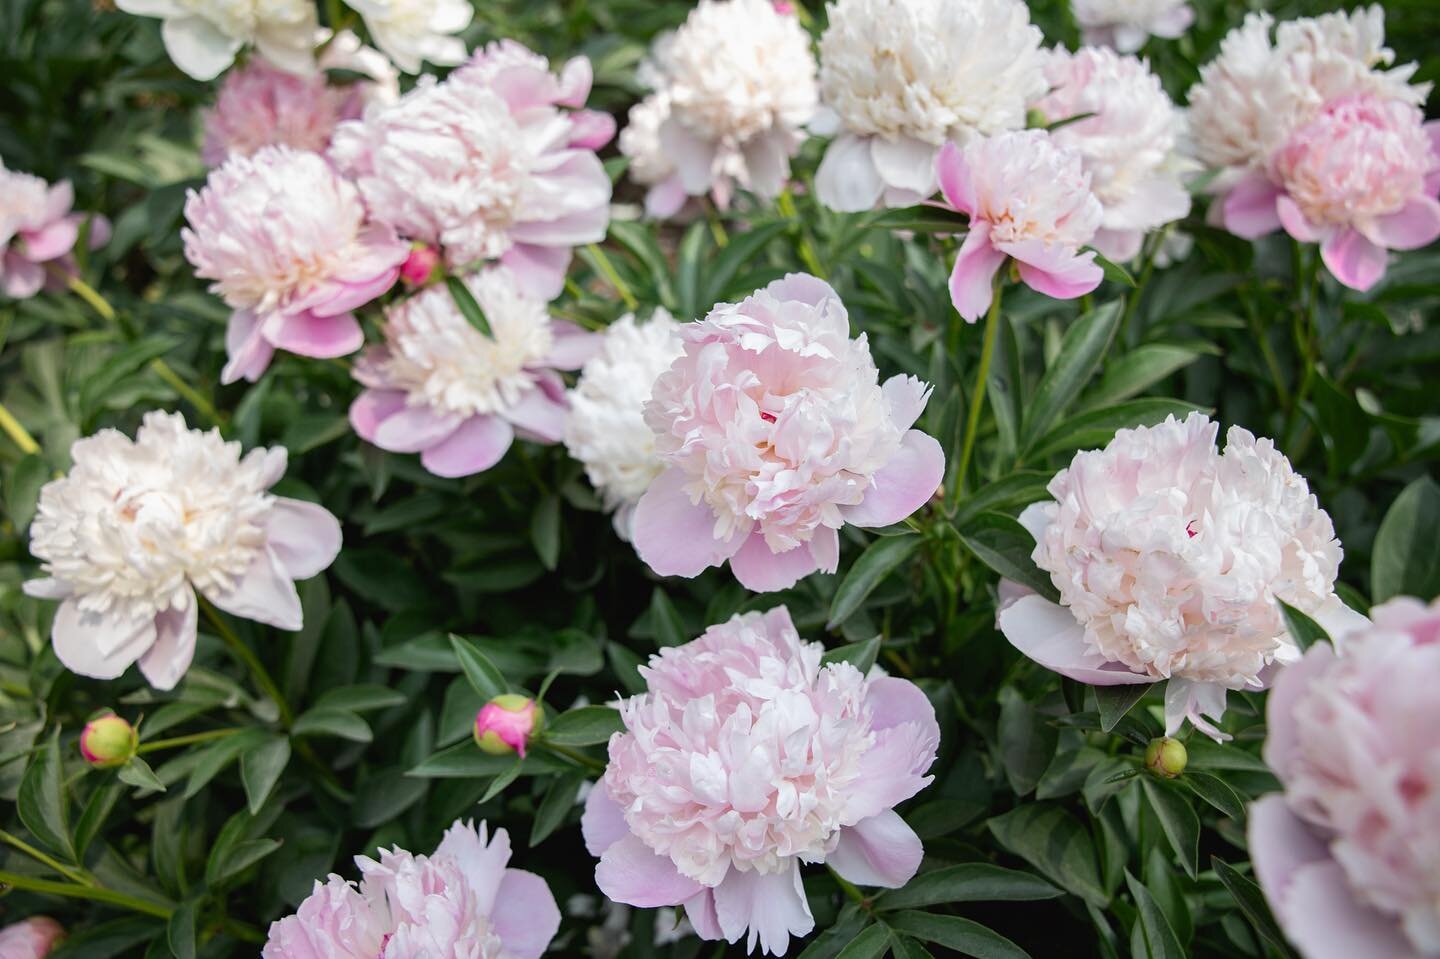 It&rsquo;s officially peonies season at the arboretum in Ann Arbor and boy I can&rsquo;t get enough! They only last for a couple of weeks in full bloom and make for the perfect photo backdrop 🌸